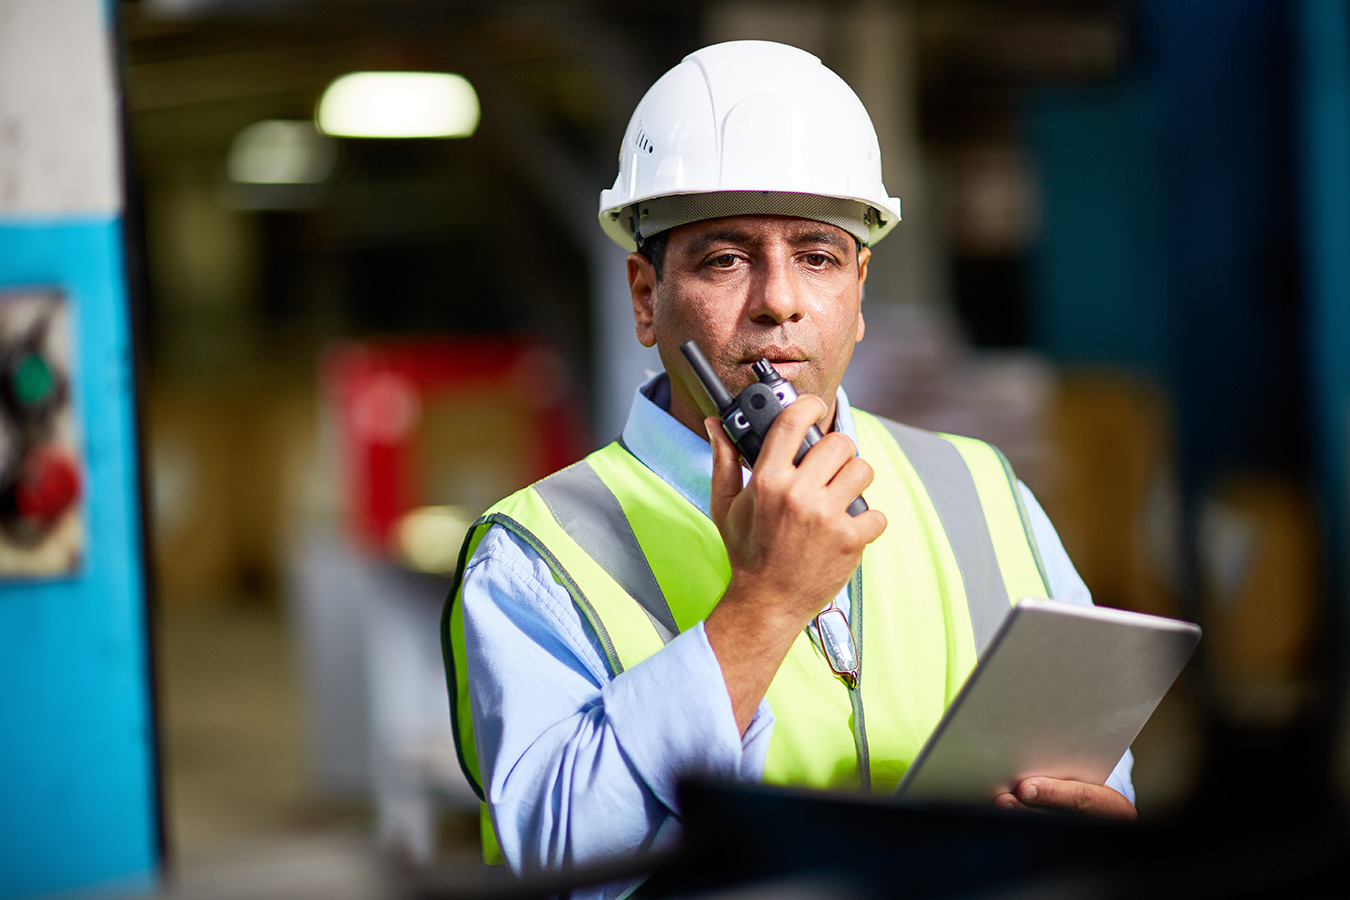 4 Areas to Address to Improve Your Company's Site Safety